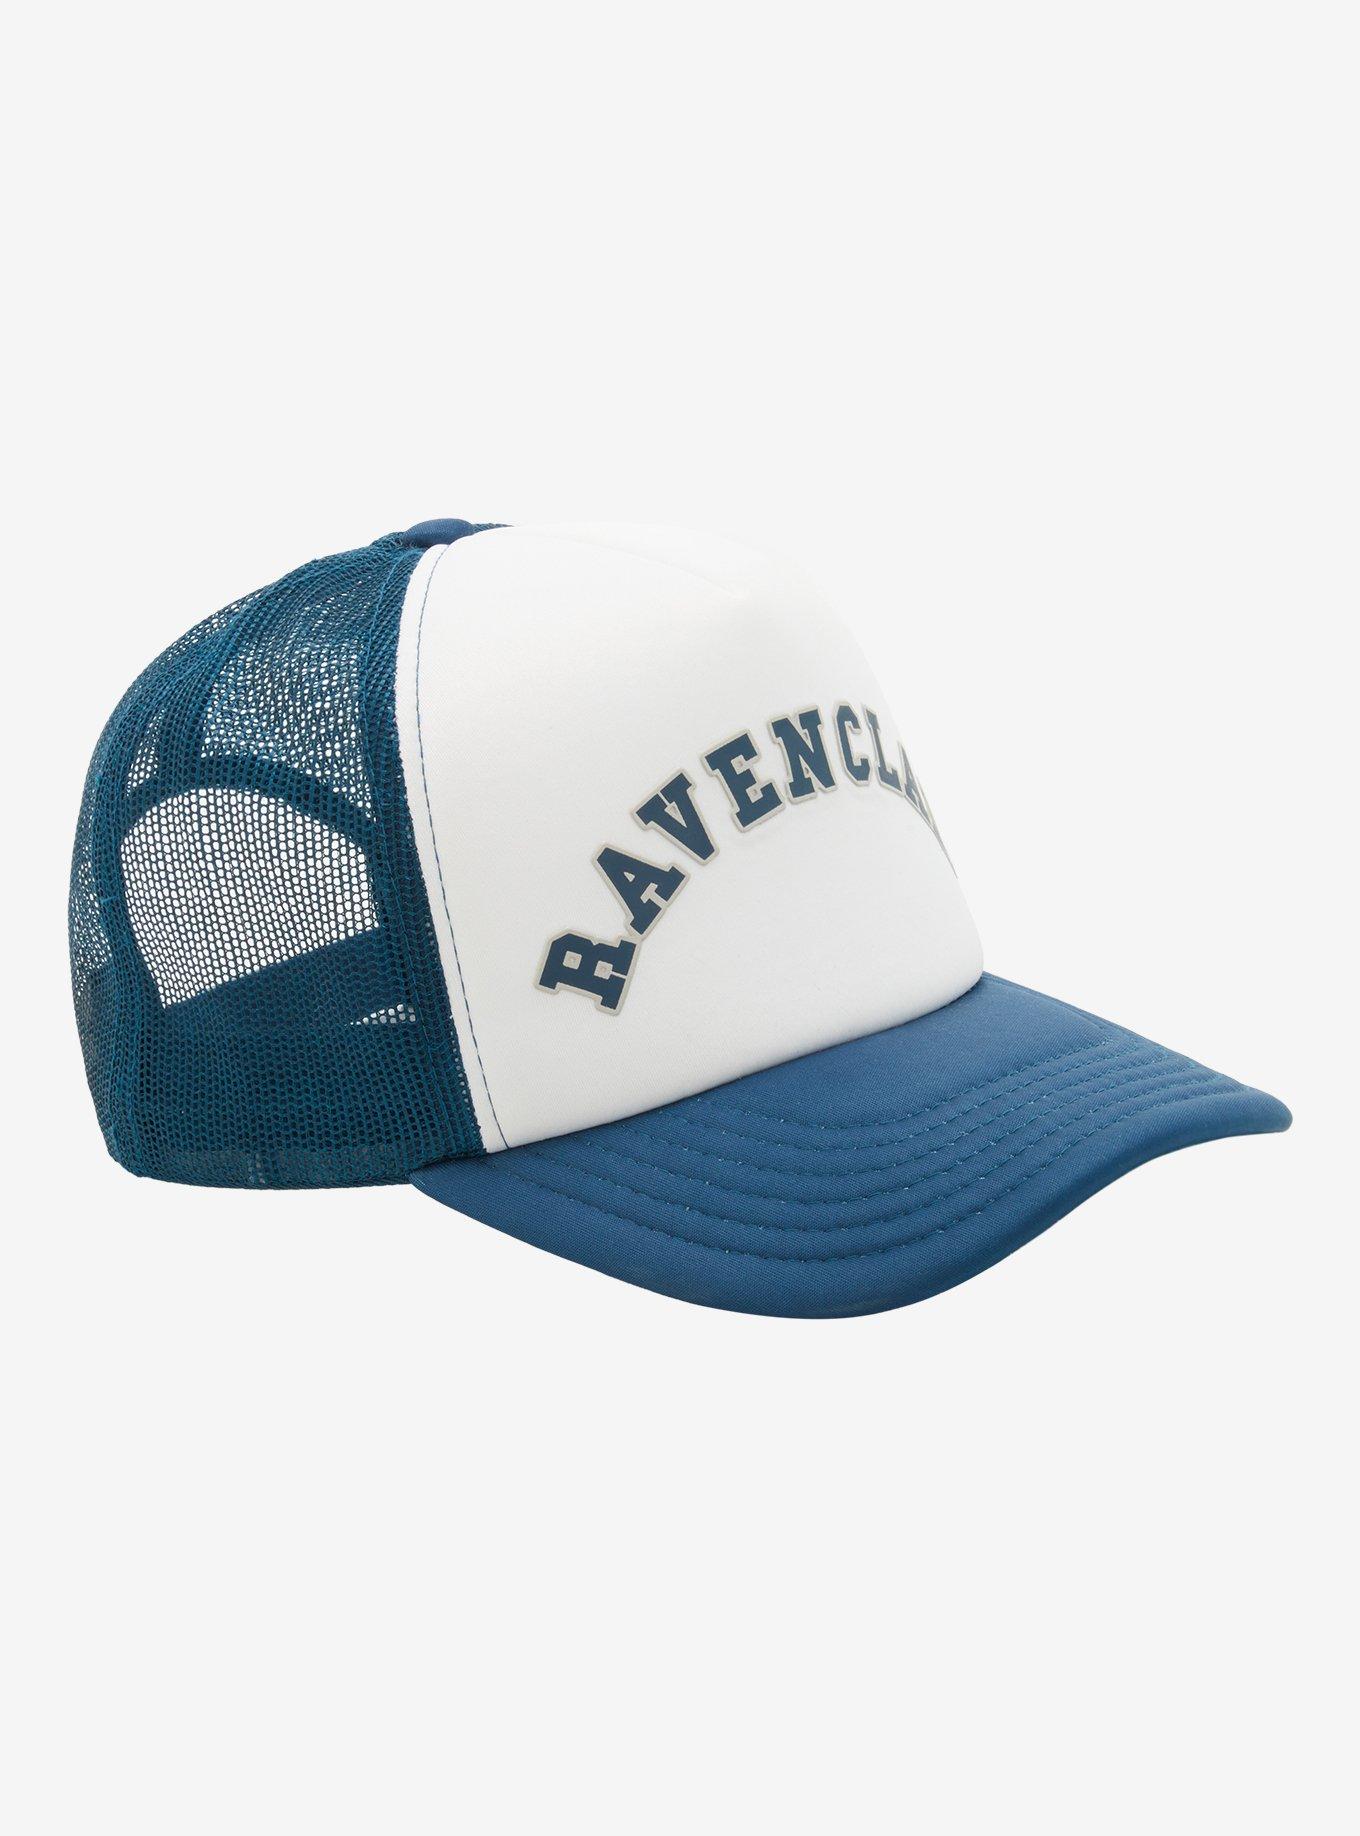 Harry Potter Ravenclaw Collegiate Trucker Cap - BoxLunch Exclusive |  BoxLunch | Baseball Caps